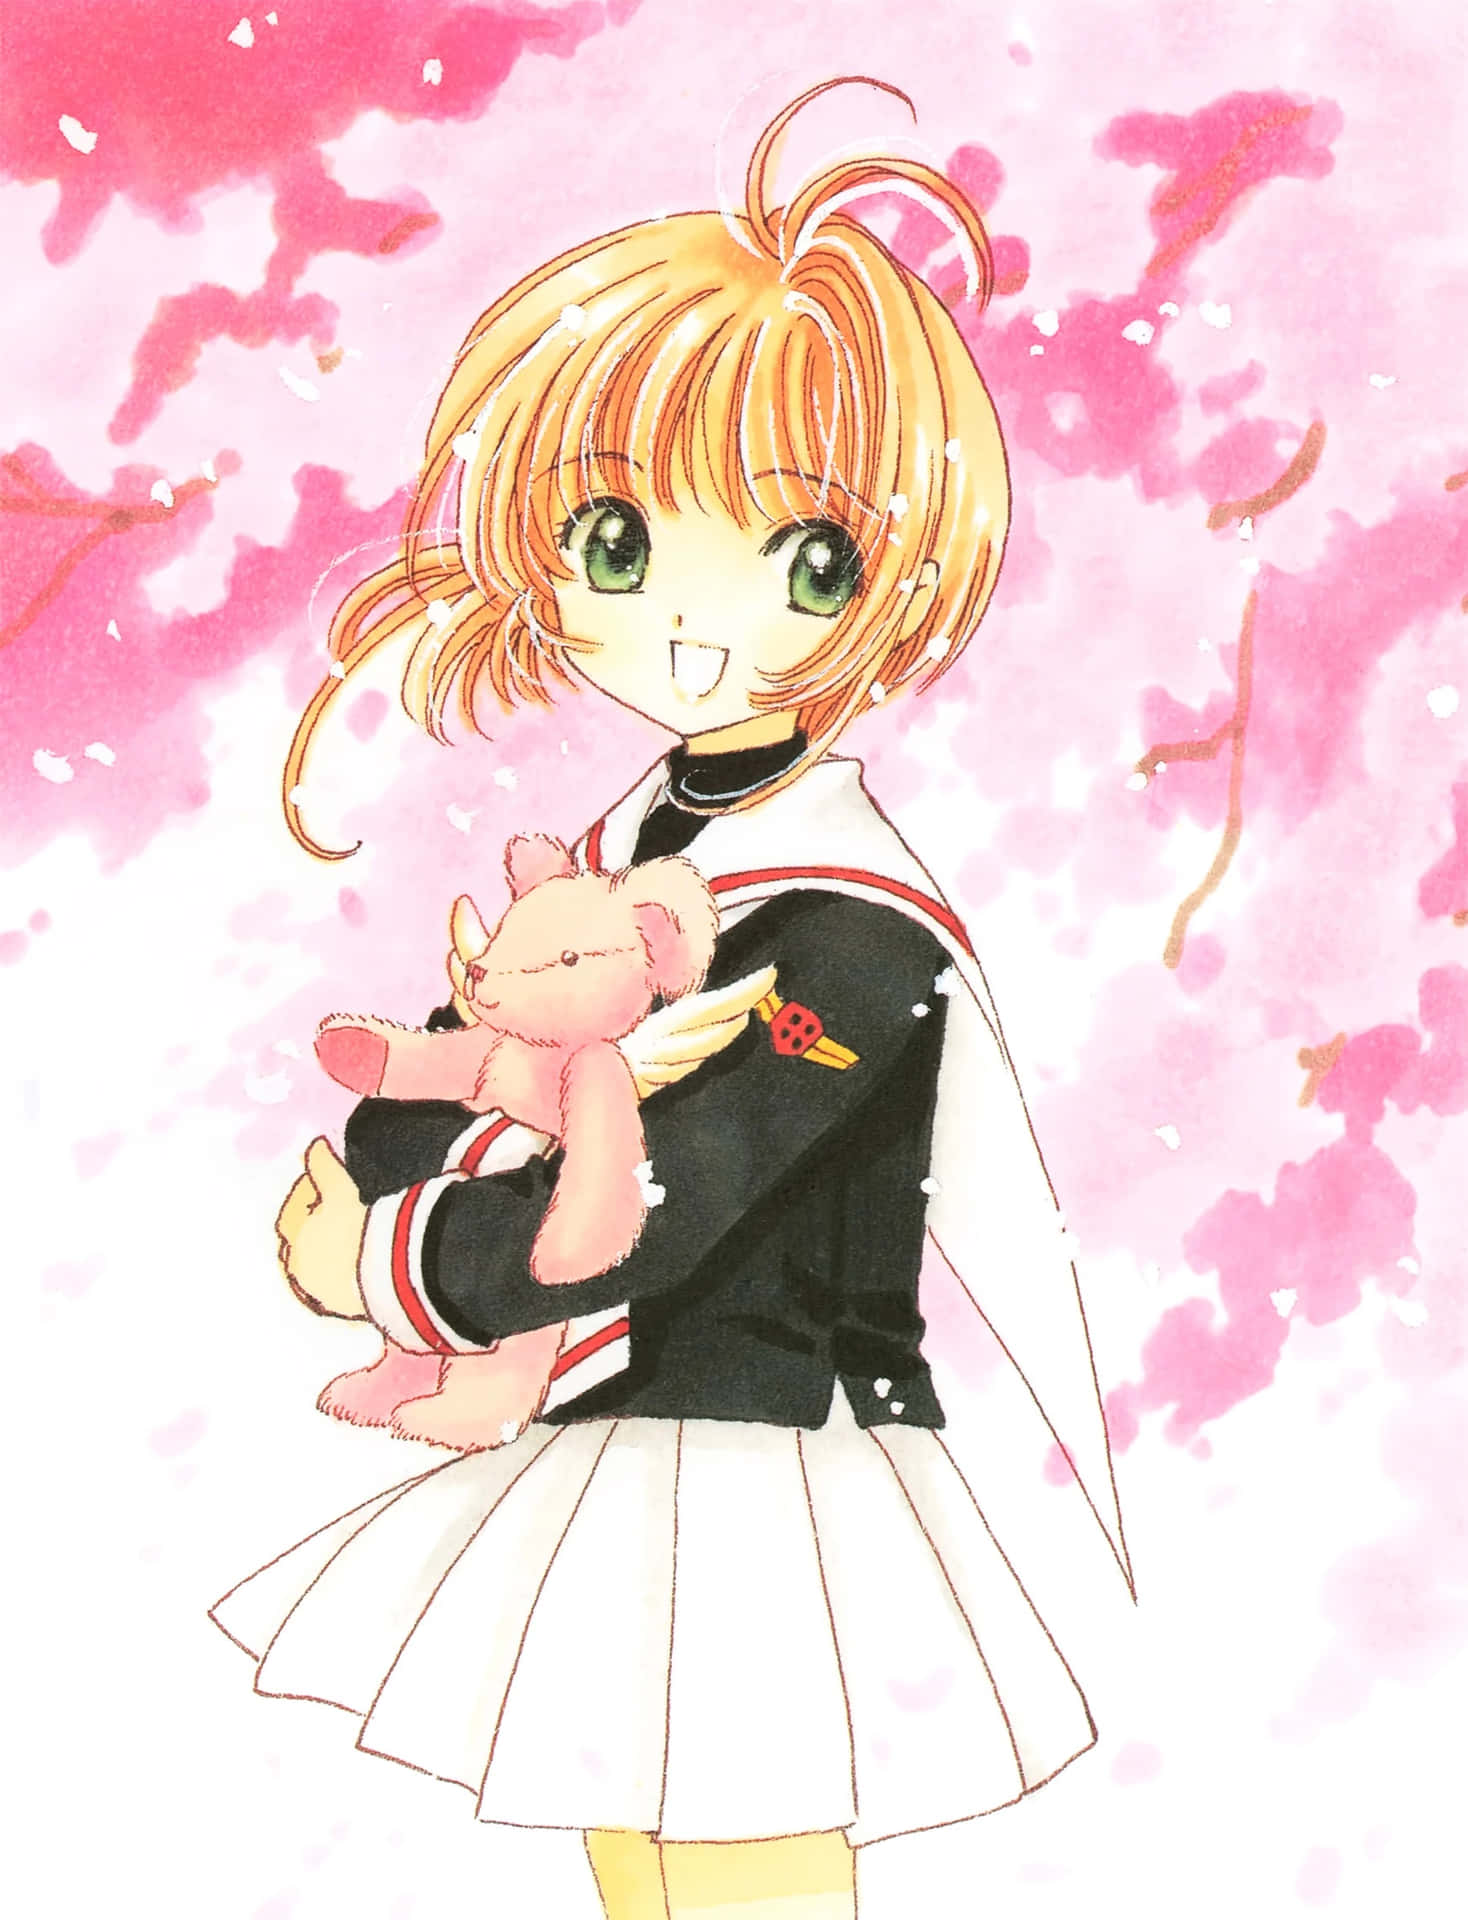 Syaoran and Sakura, two cardcaptors and best friends, ready to use their special magic to protect their world.